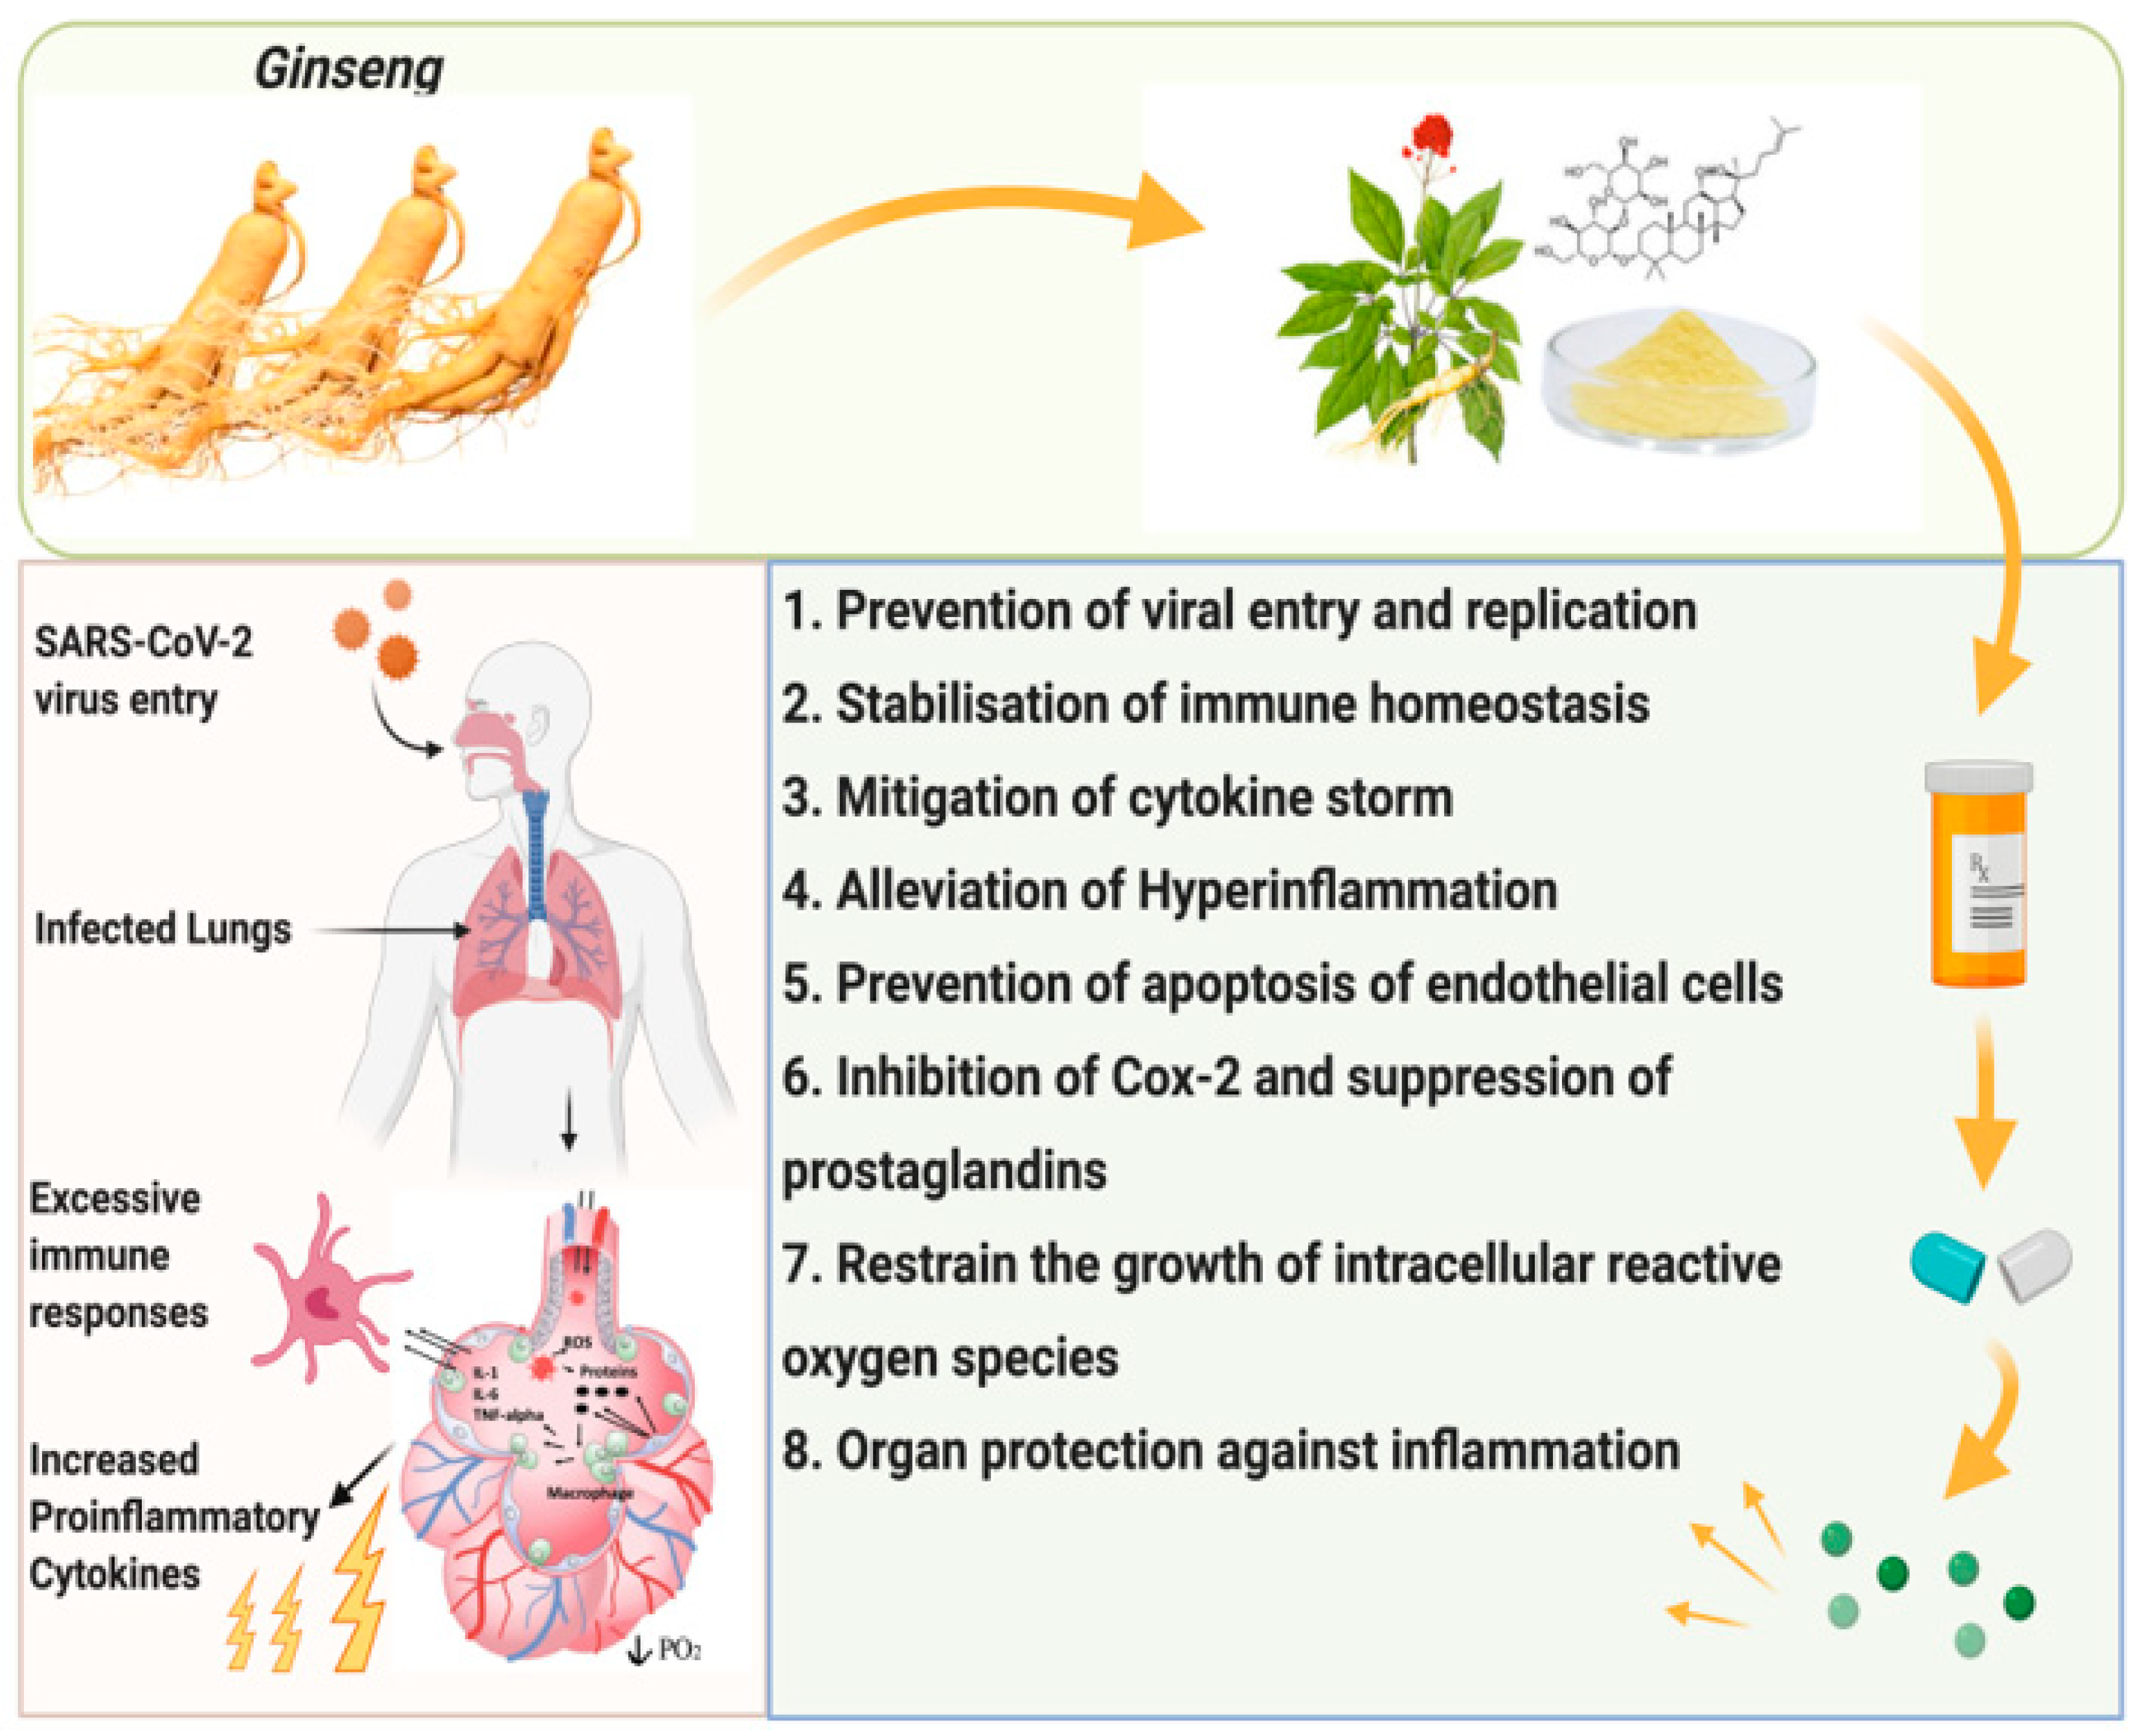 Ginseng for respiratory health